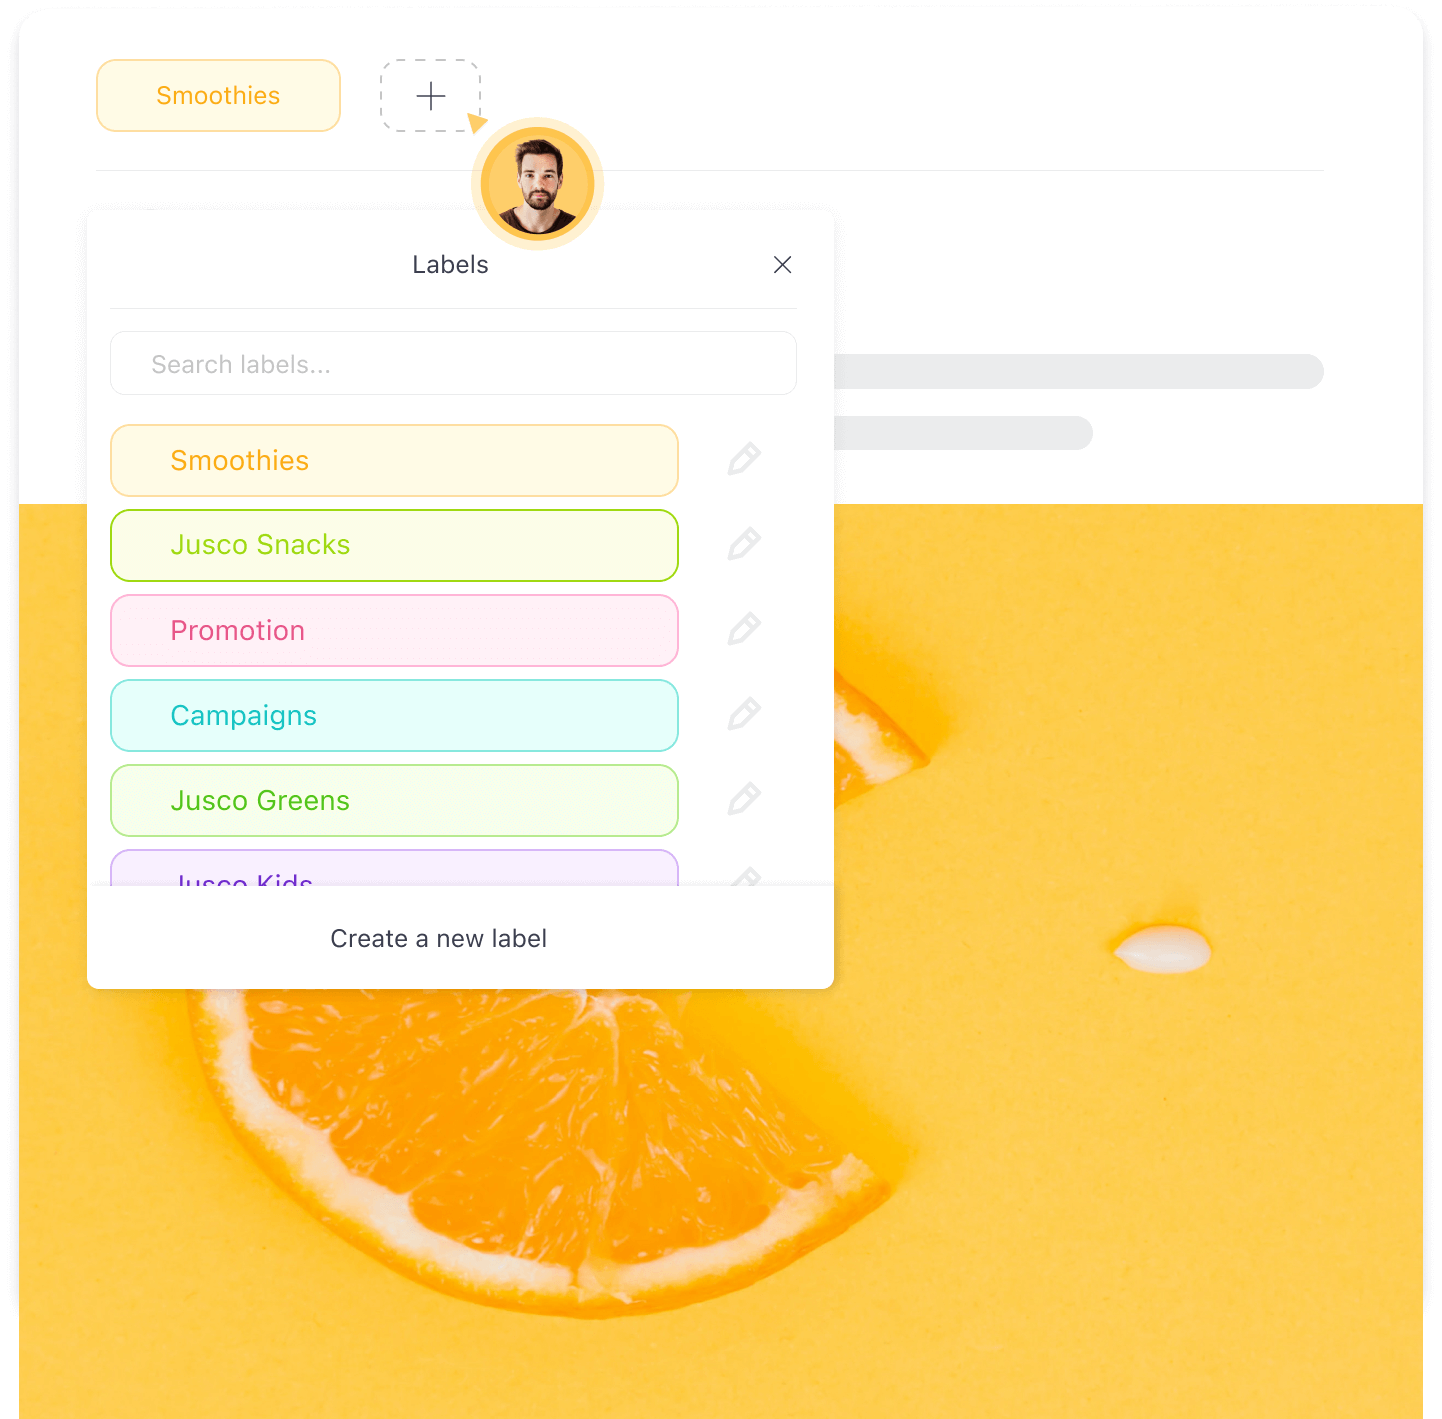 Planable's labels functionality with existing labels and the option to Create a new label